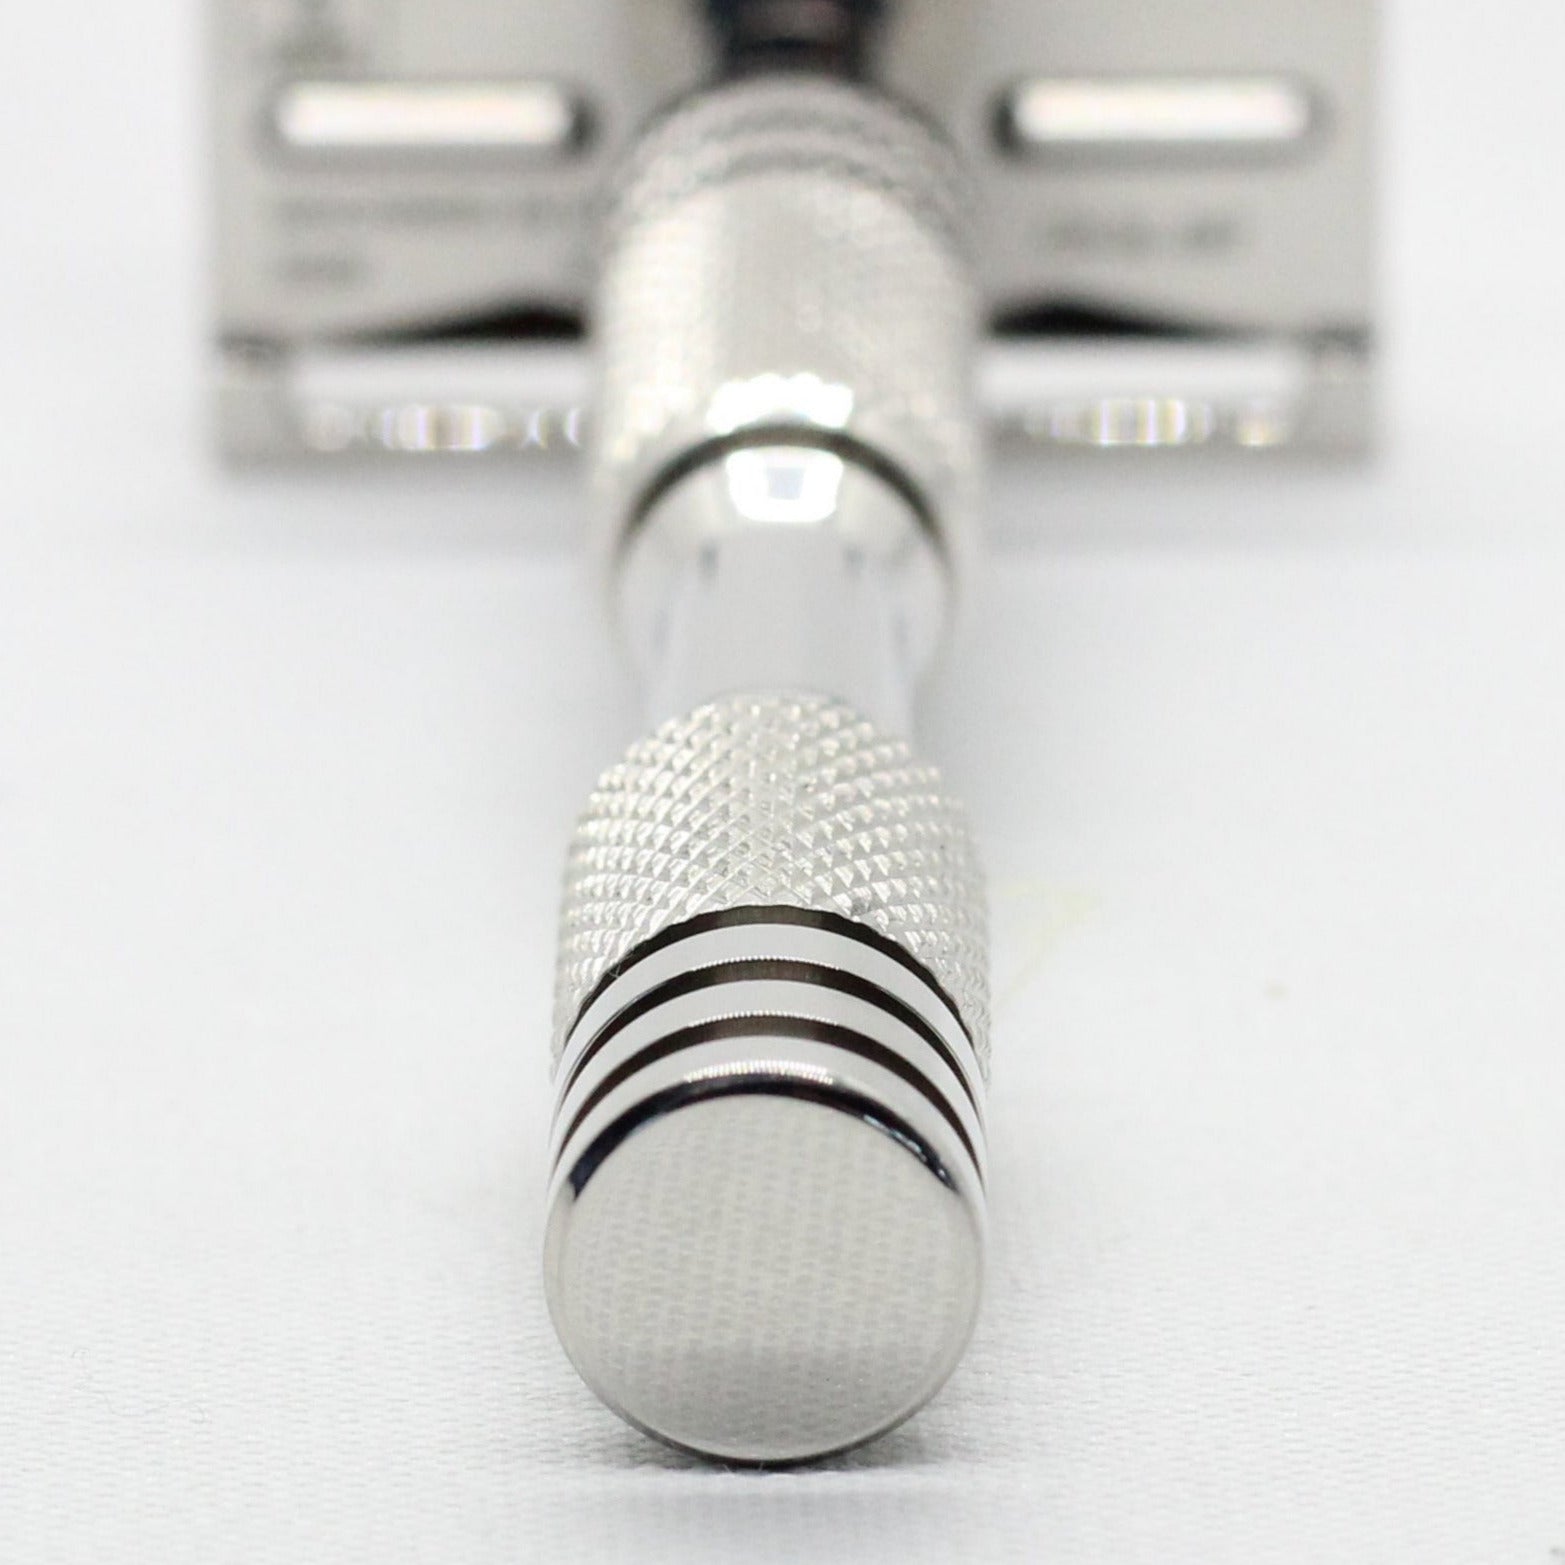 Reserved: R2 Handle (316L Stainless or Titanium)